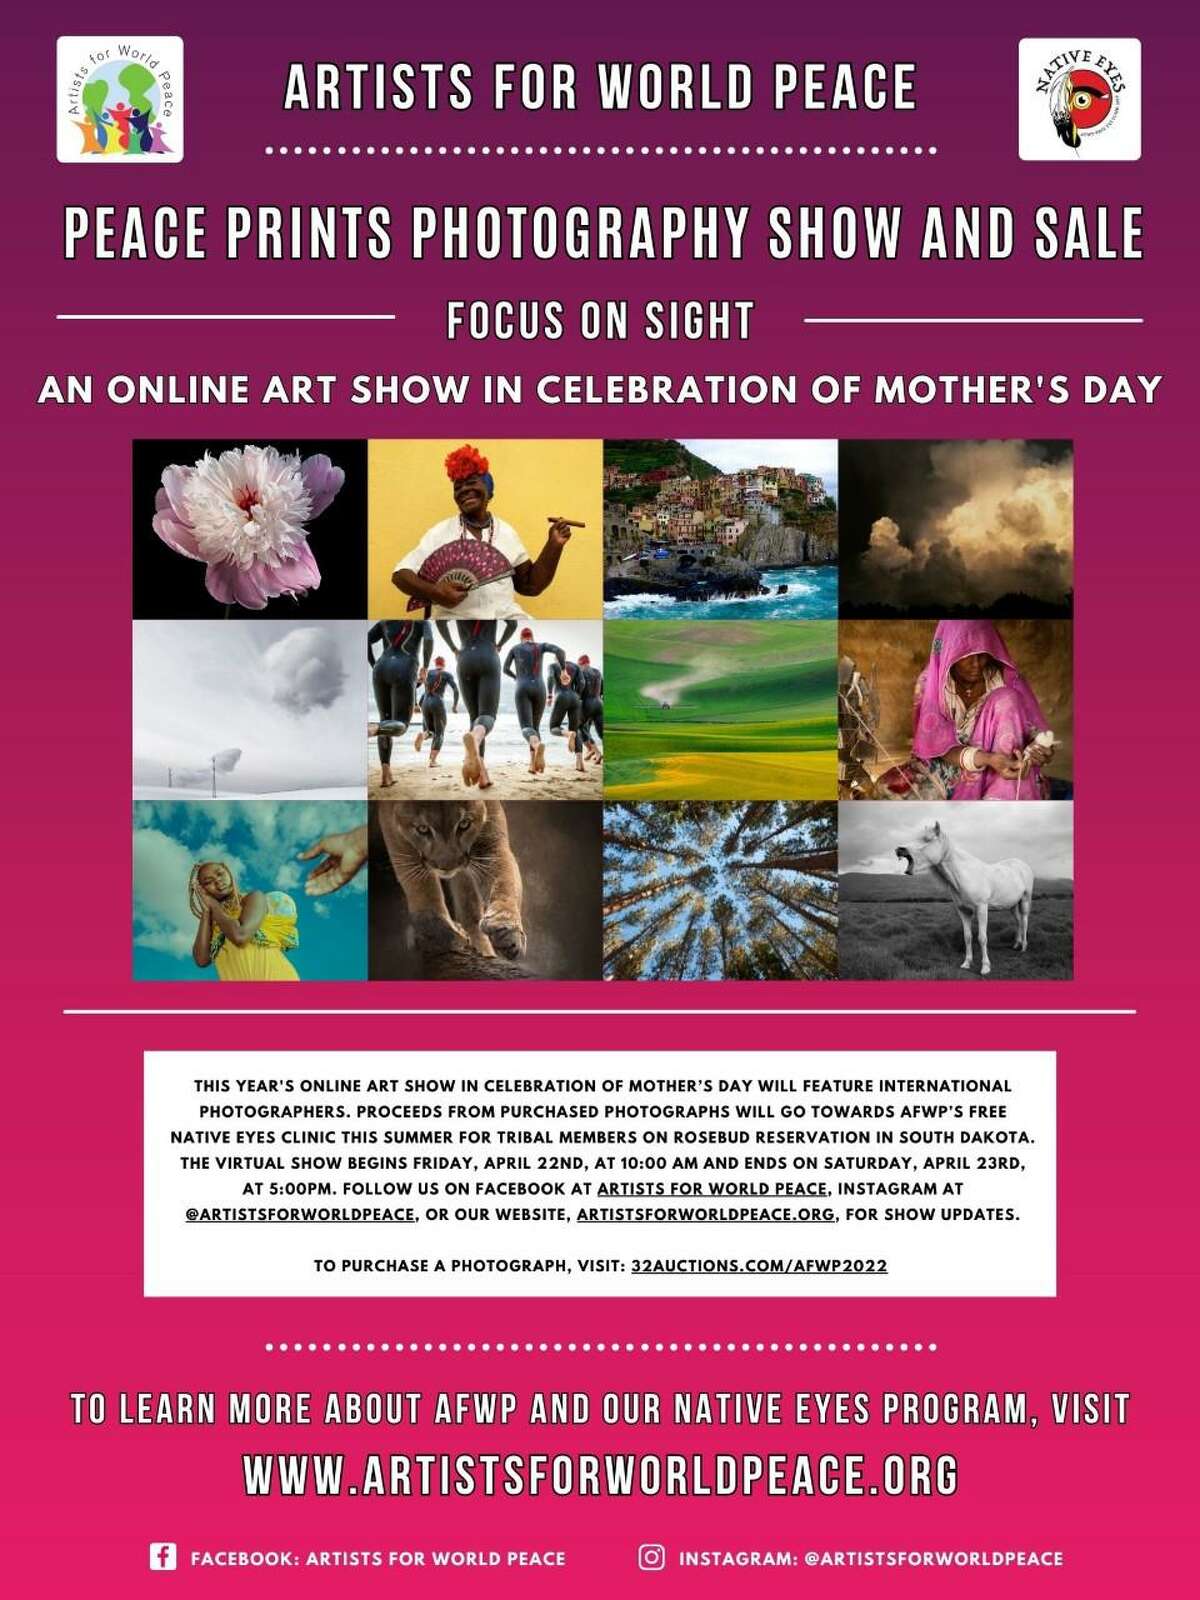 Artists For World Peace of Middletown is hosting an online Peace Prints auction, “Focus on Sight,” this weekend, which will celebrate Mother’s Day and spotlights the talents of Molly Salafia of Middletown, Claudia Paul of New York City; and founder Wendy Black-Nasta of Middletown.